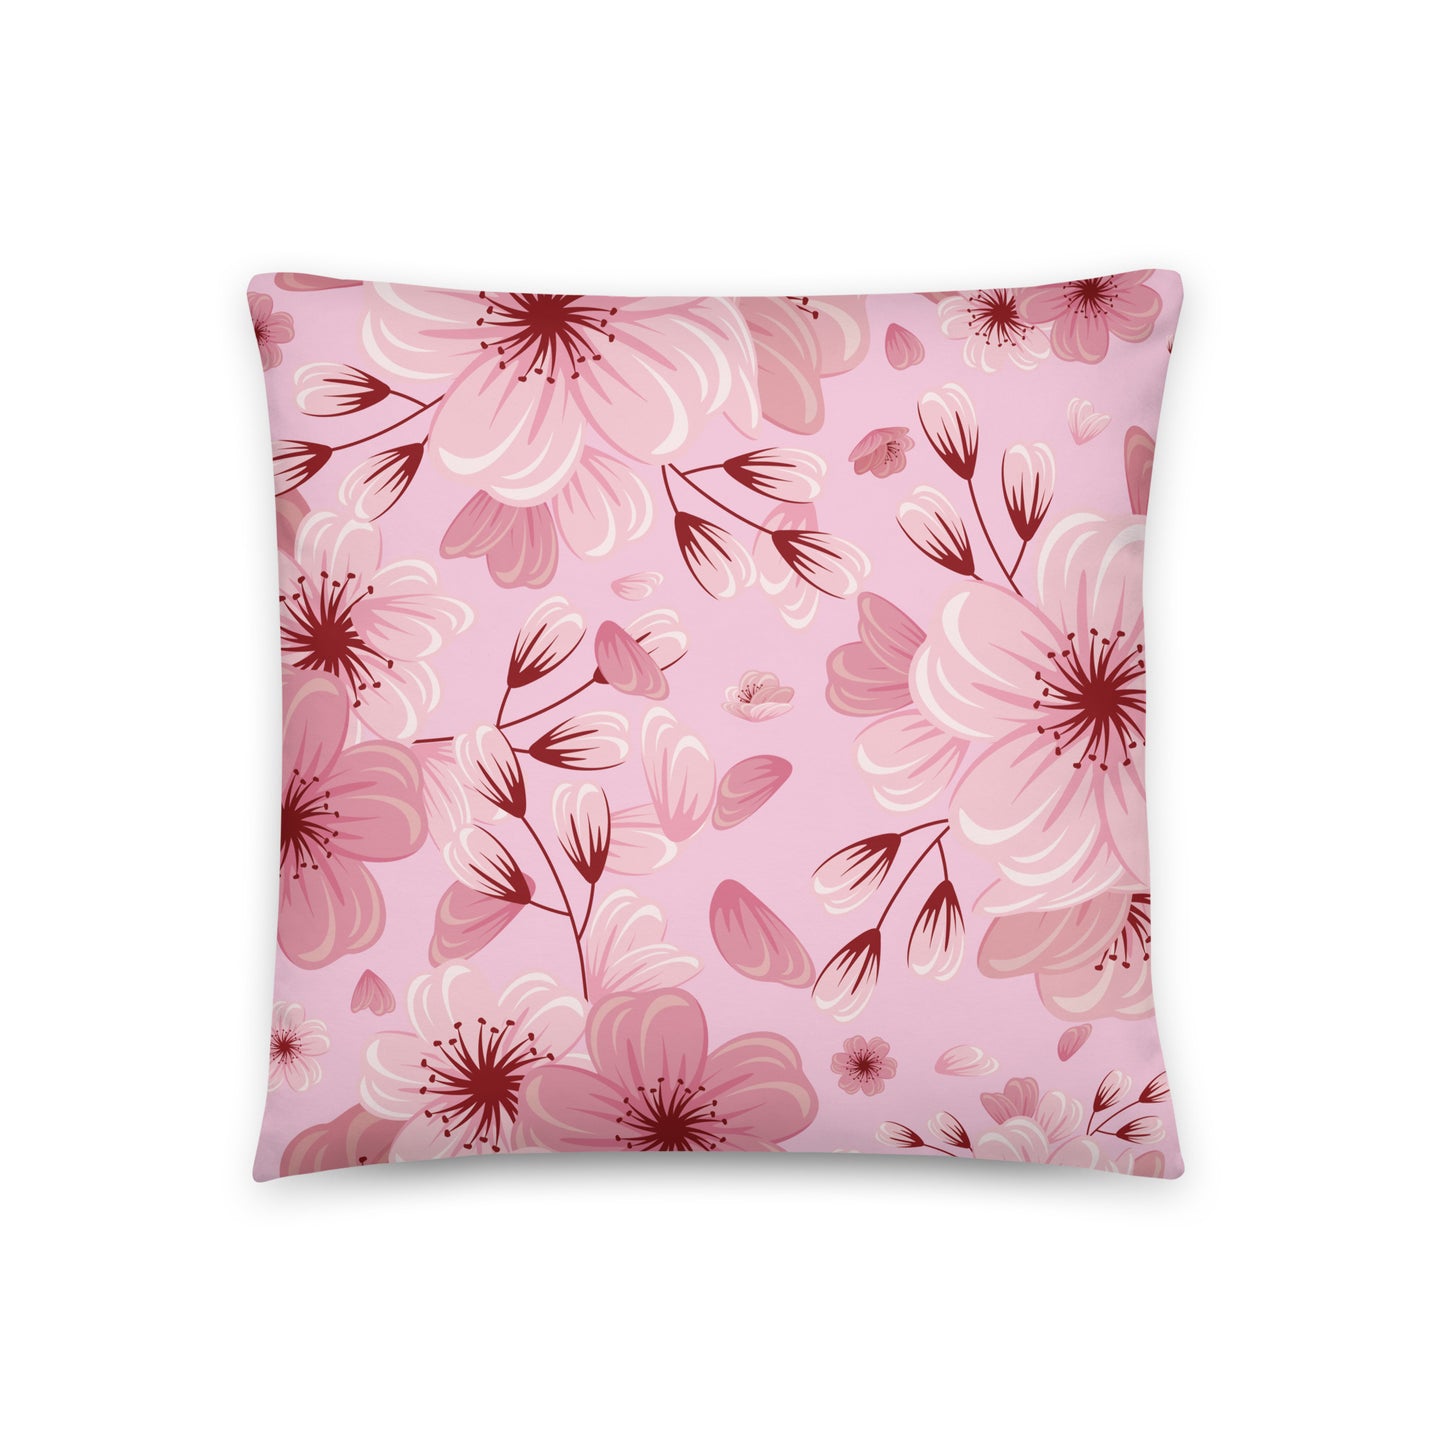 Cherry Blossom - Sustainably Made Pillows